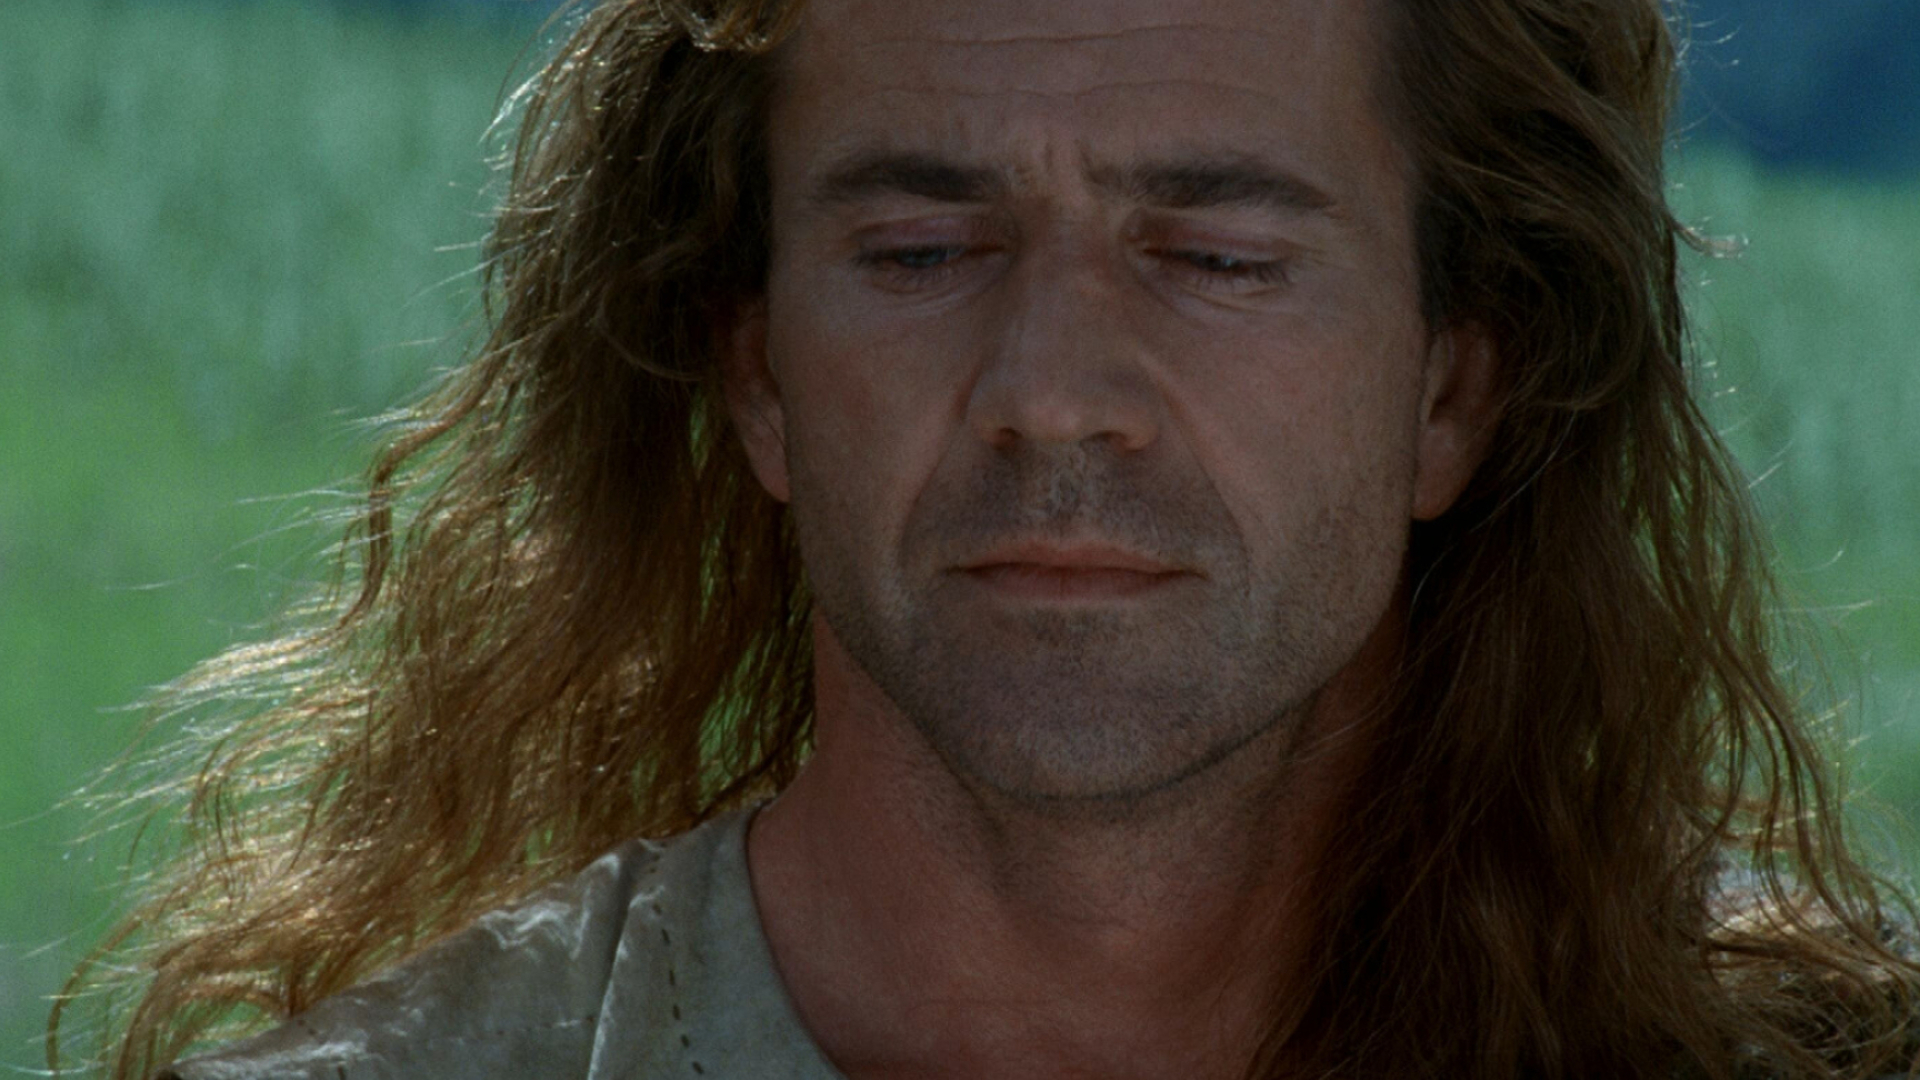 Braveheart: The movie premiered at the Seattle International Film Festival on May 18, 1995. 1920x1080 Full HD Background.